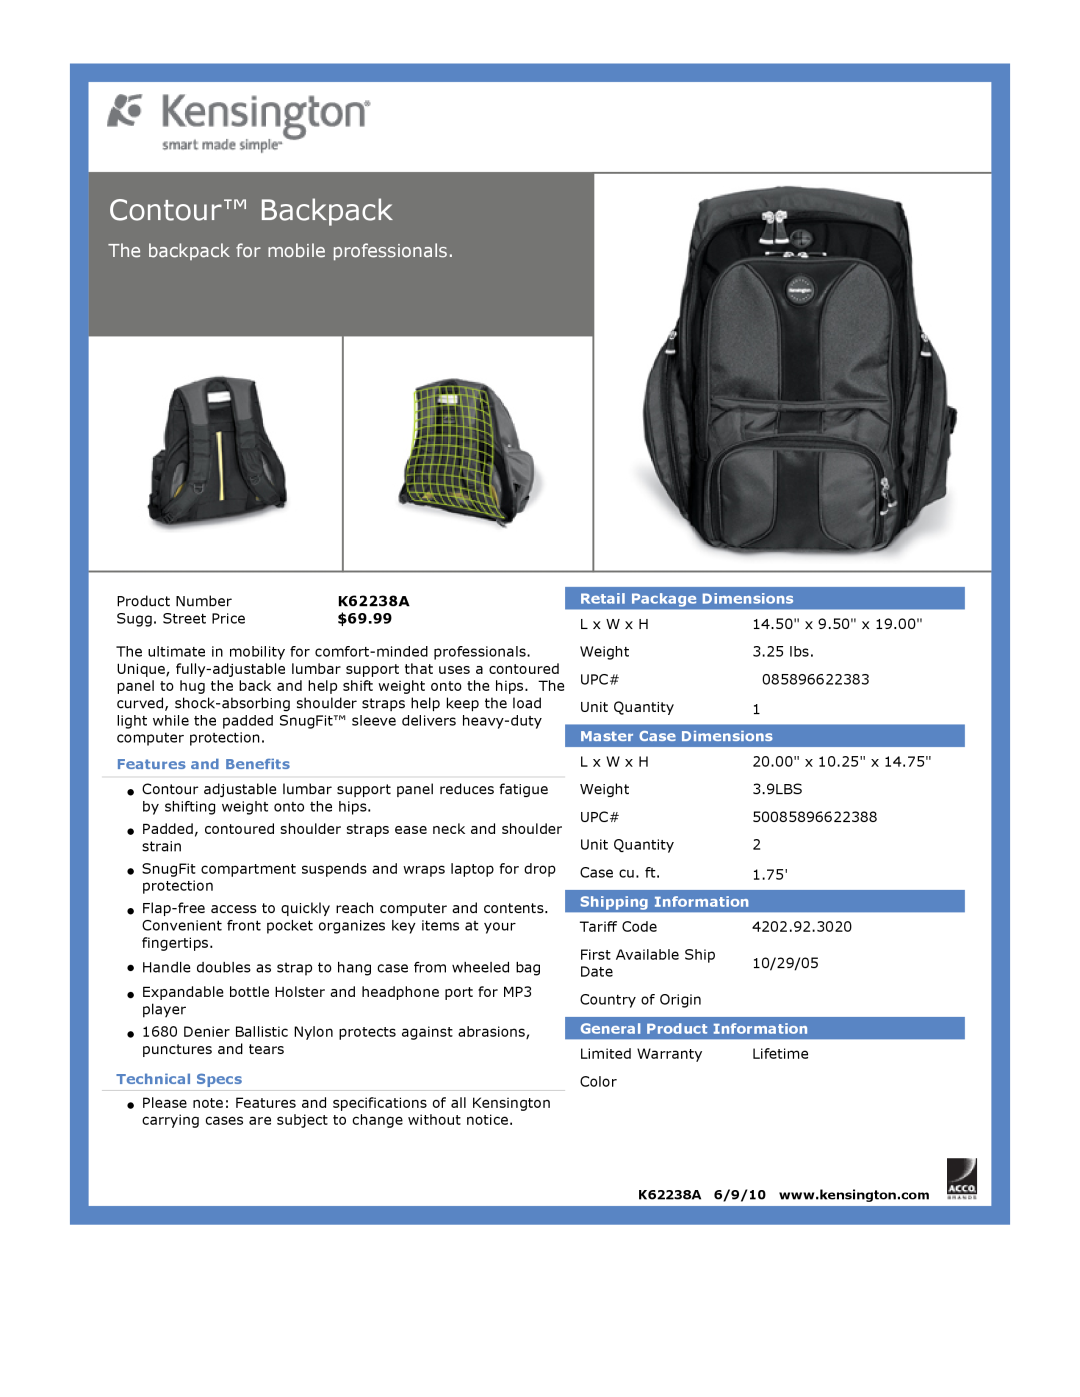 Kensington EU64325 Contour Backpack, The backpack for mobile professionals, $69.99, Features and Benefits, Technical Specs 